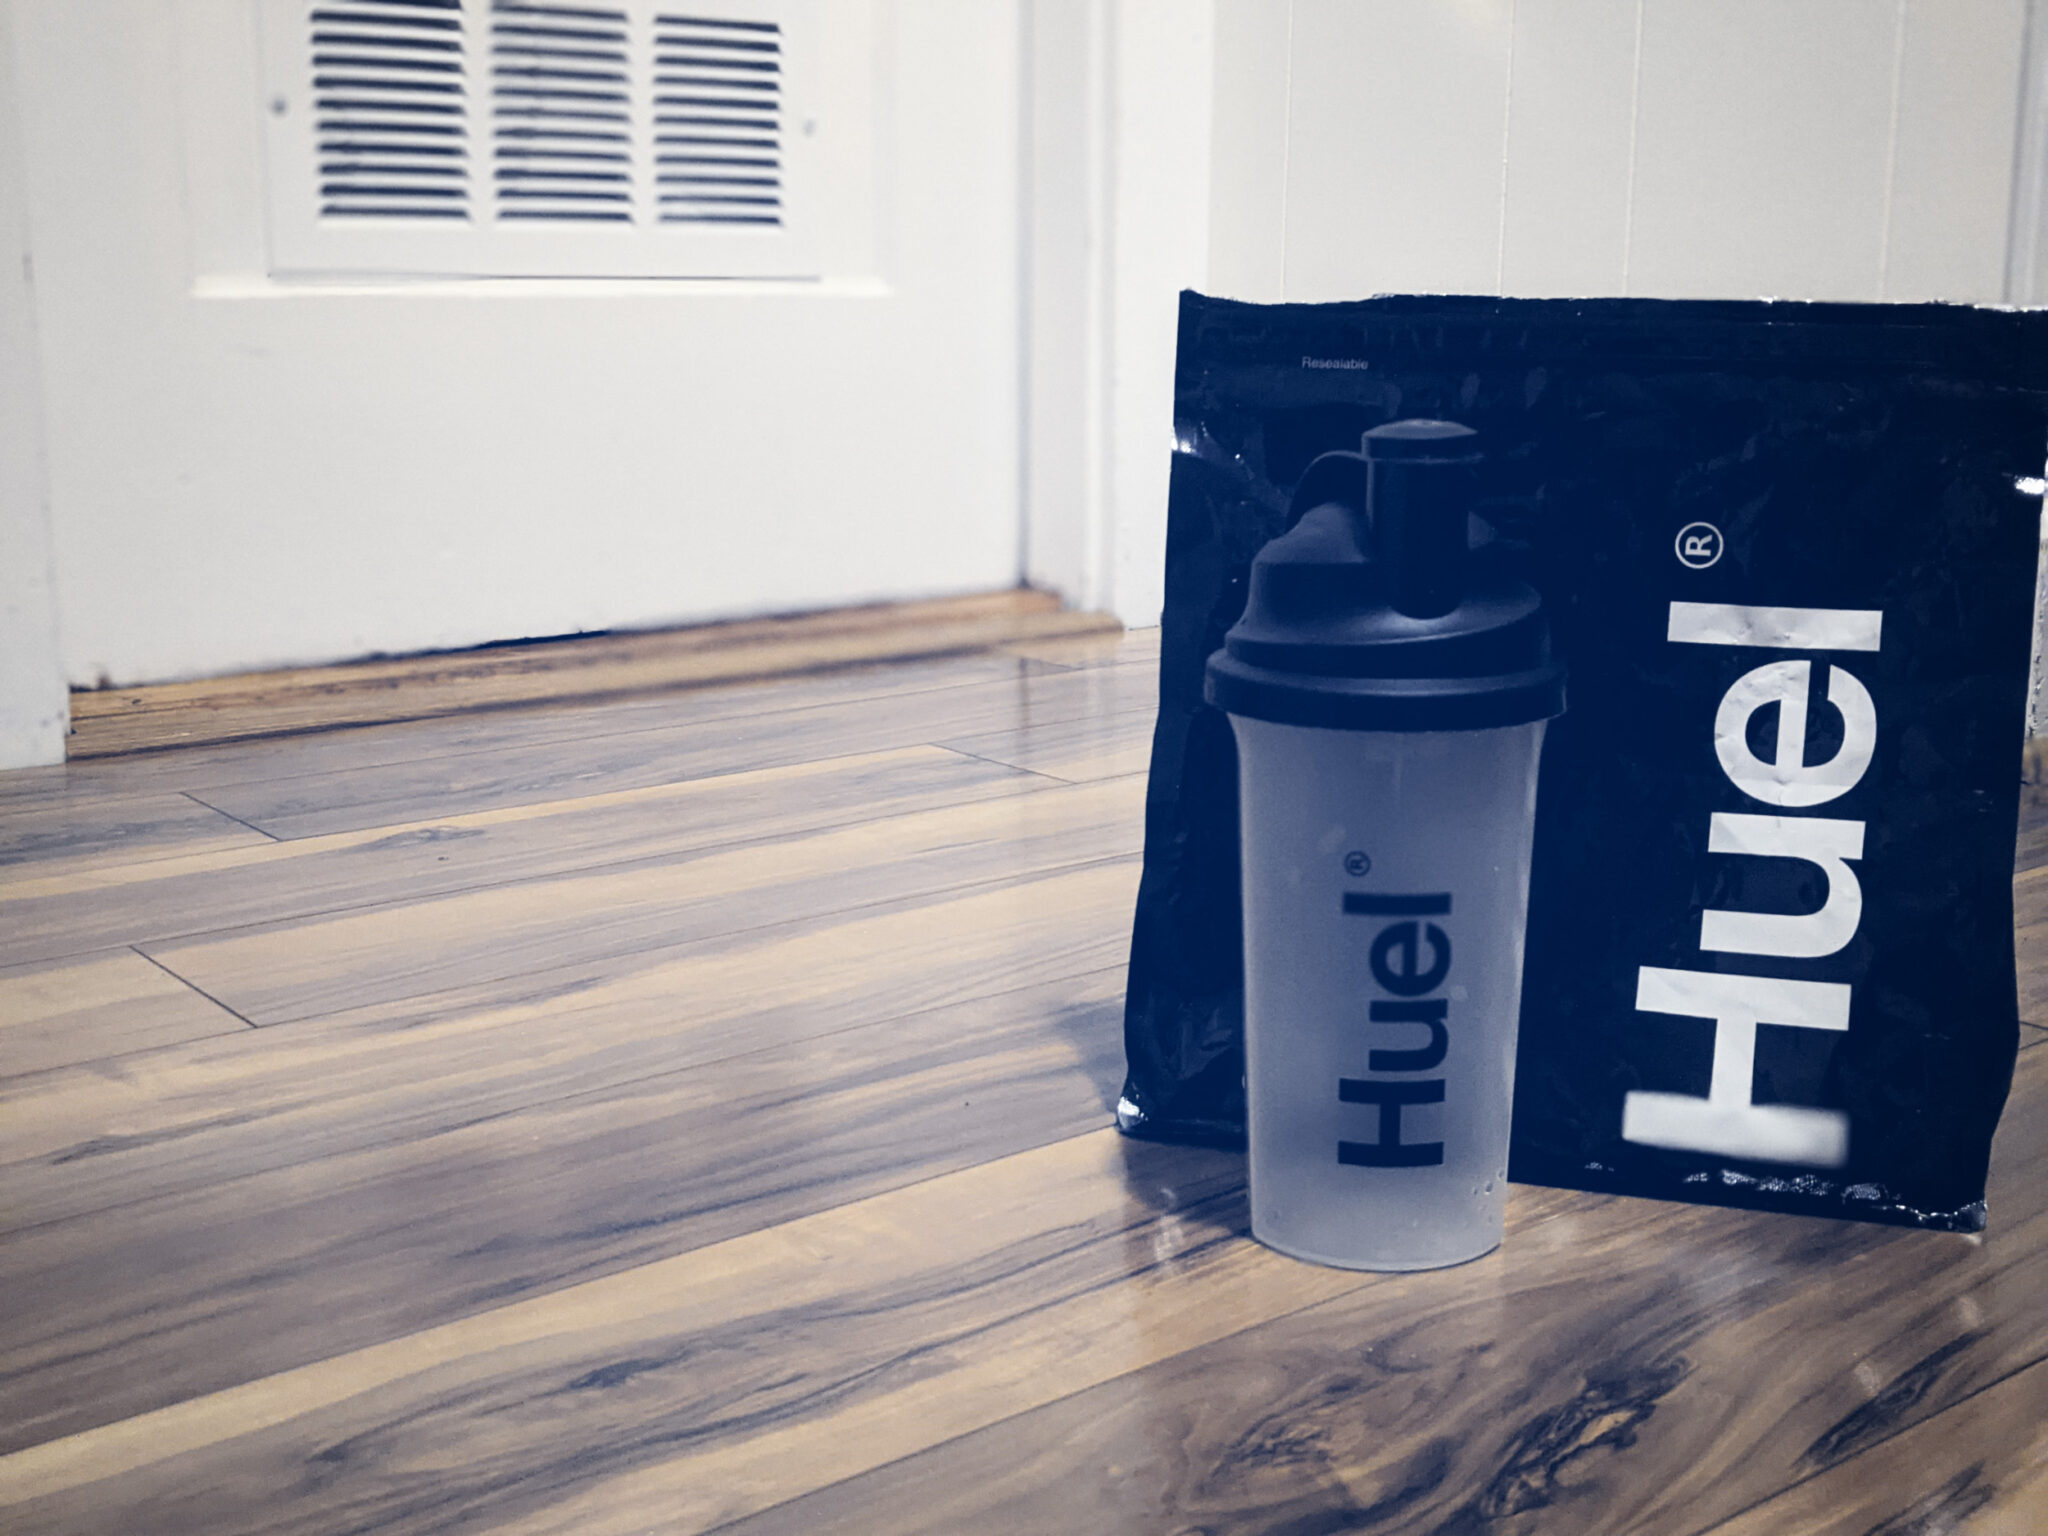 https://illnesstoultra.com/wp-content/uploads/2020/11/huel-runners-with-shaker-scaled.jpg